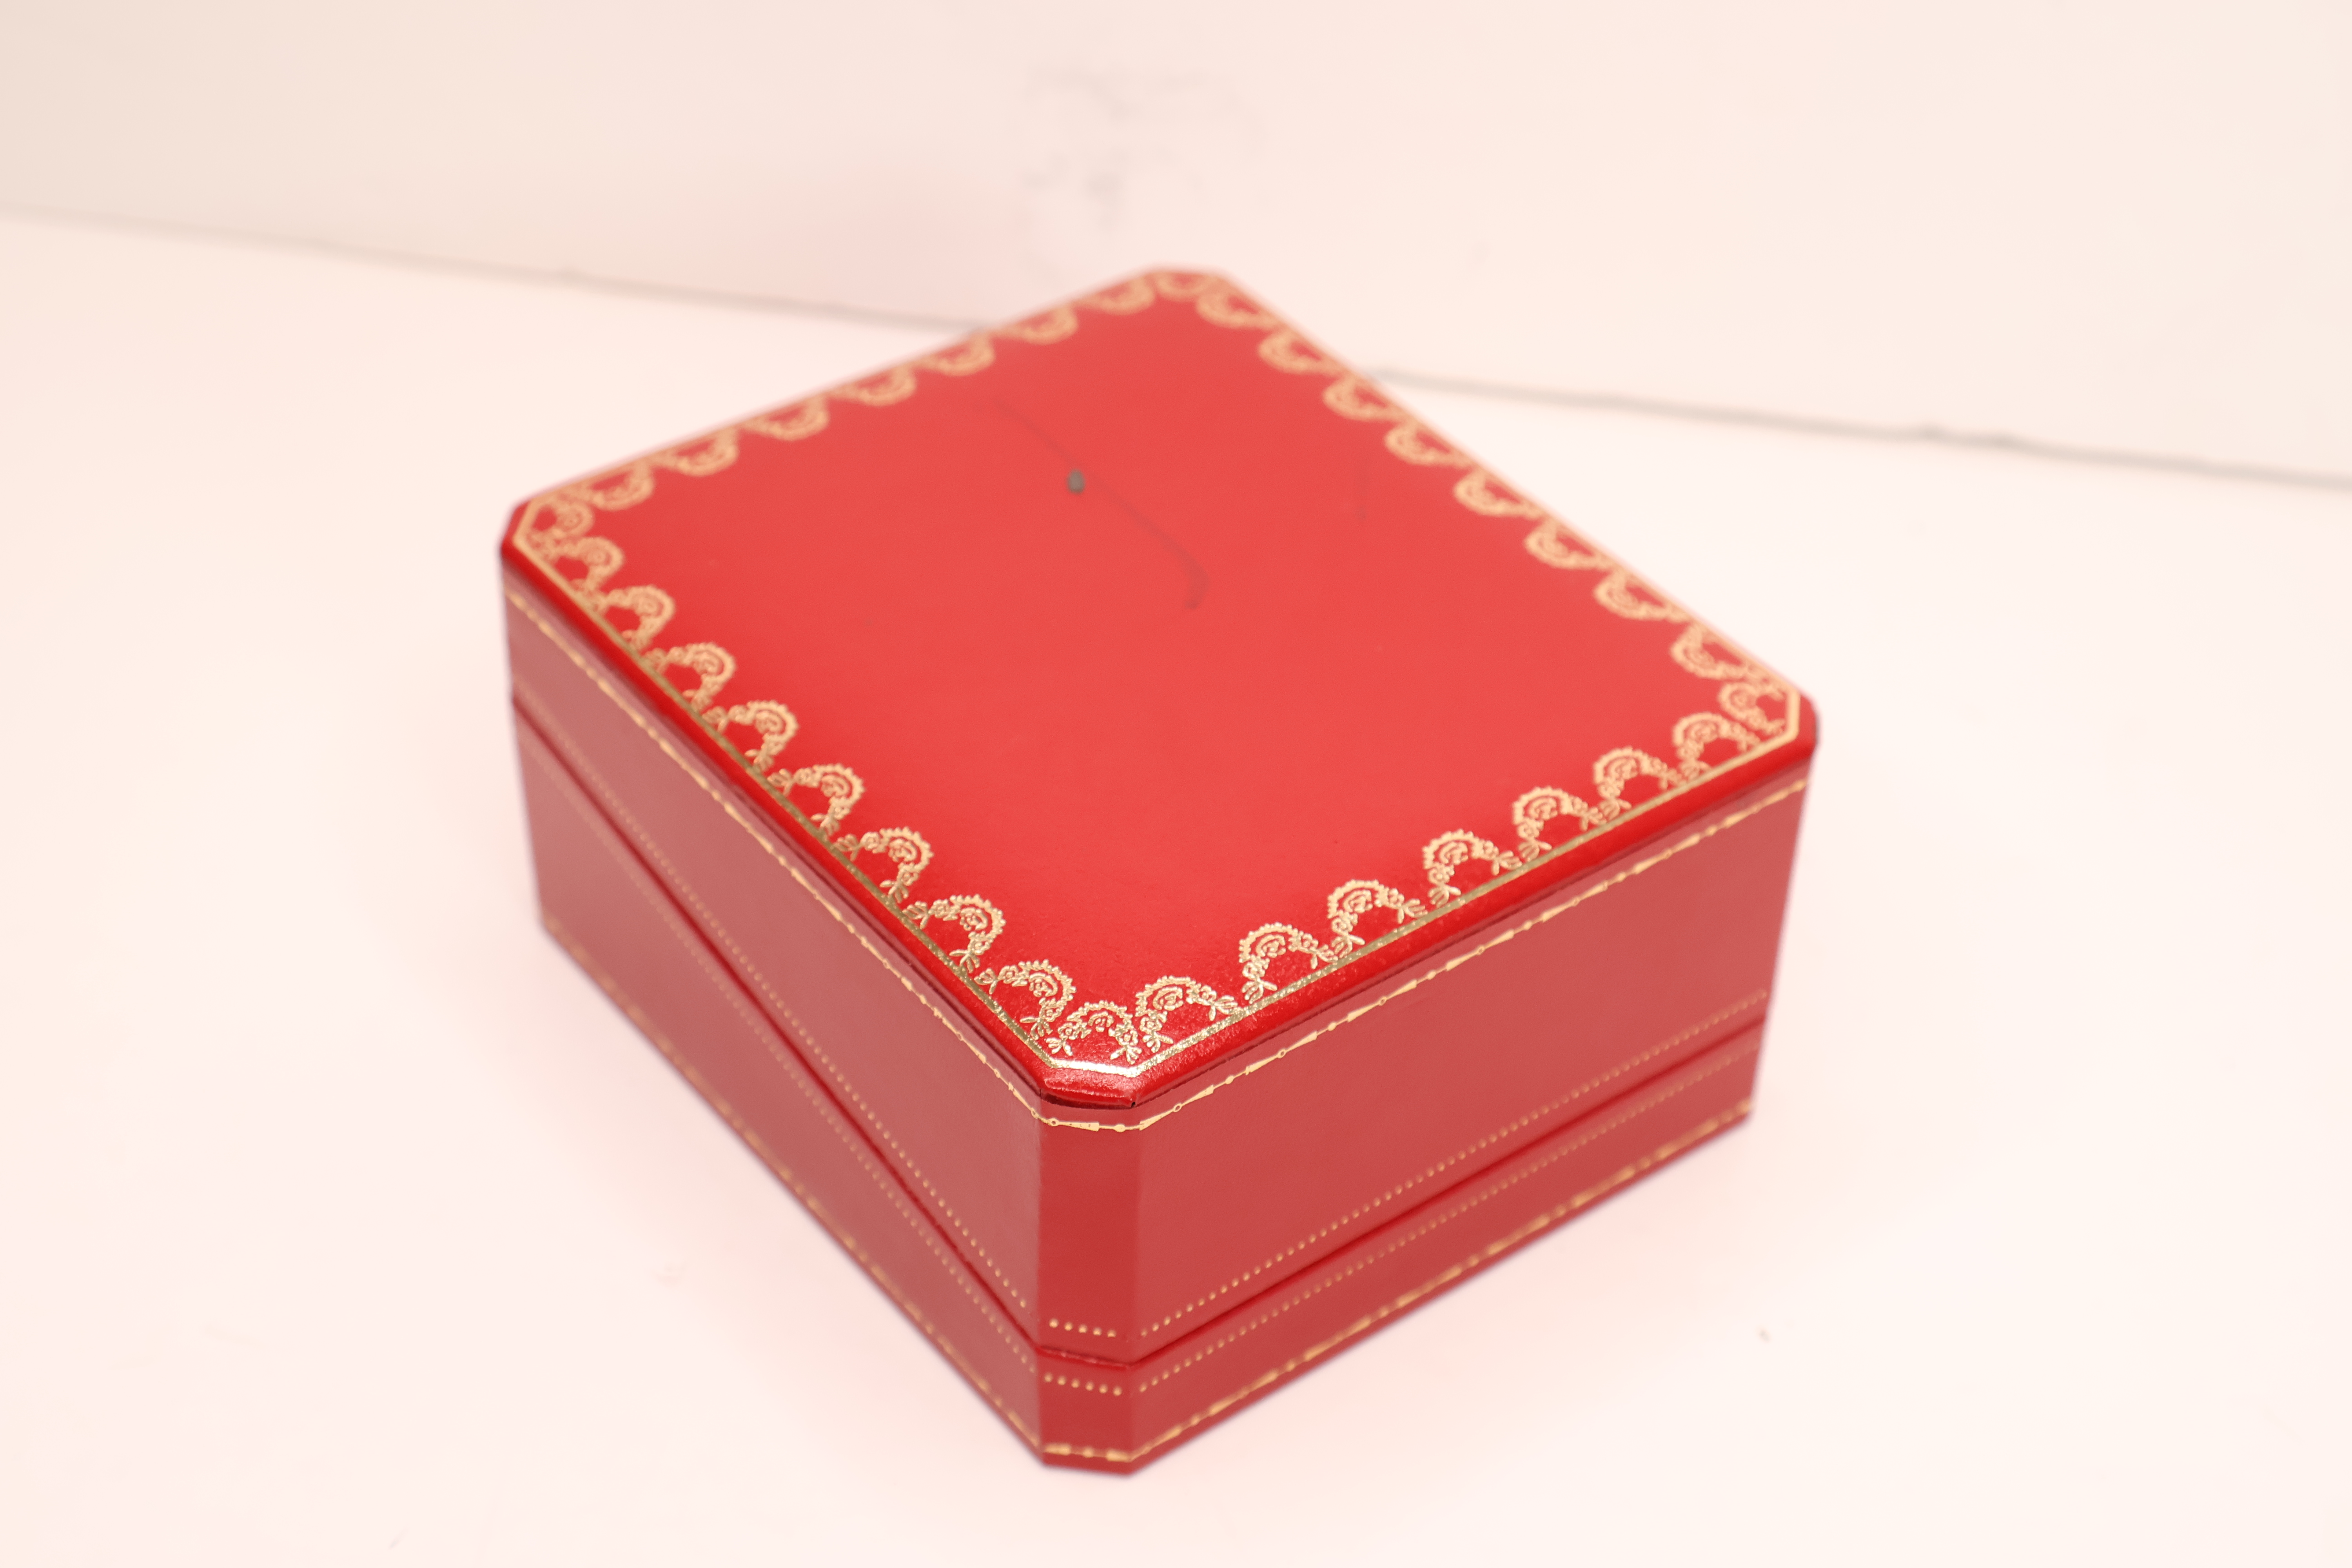 *To Be Sold Without Reserve* Cartier watch box missing c-clip - Image 2 of 2